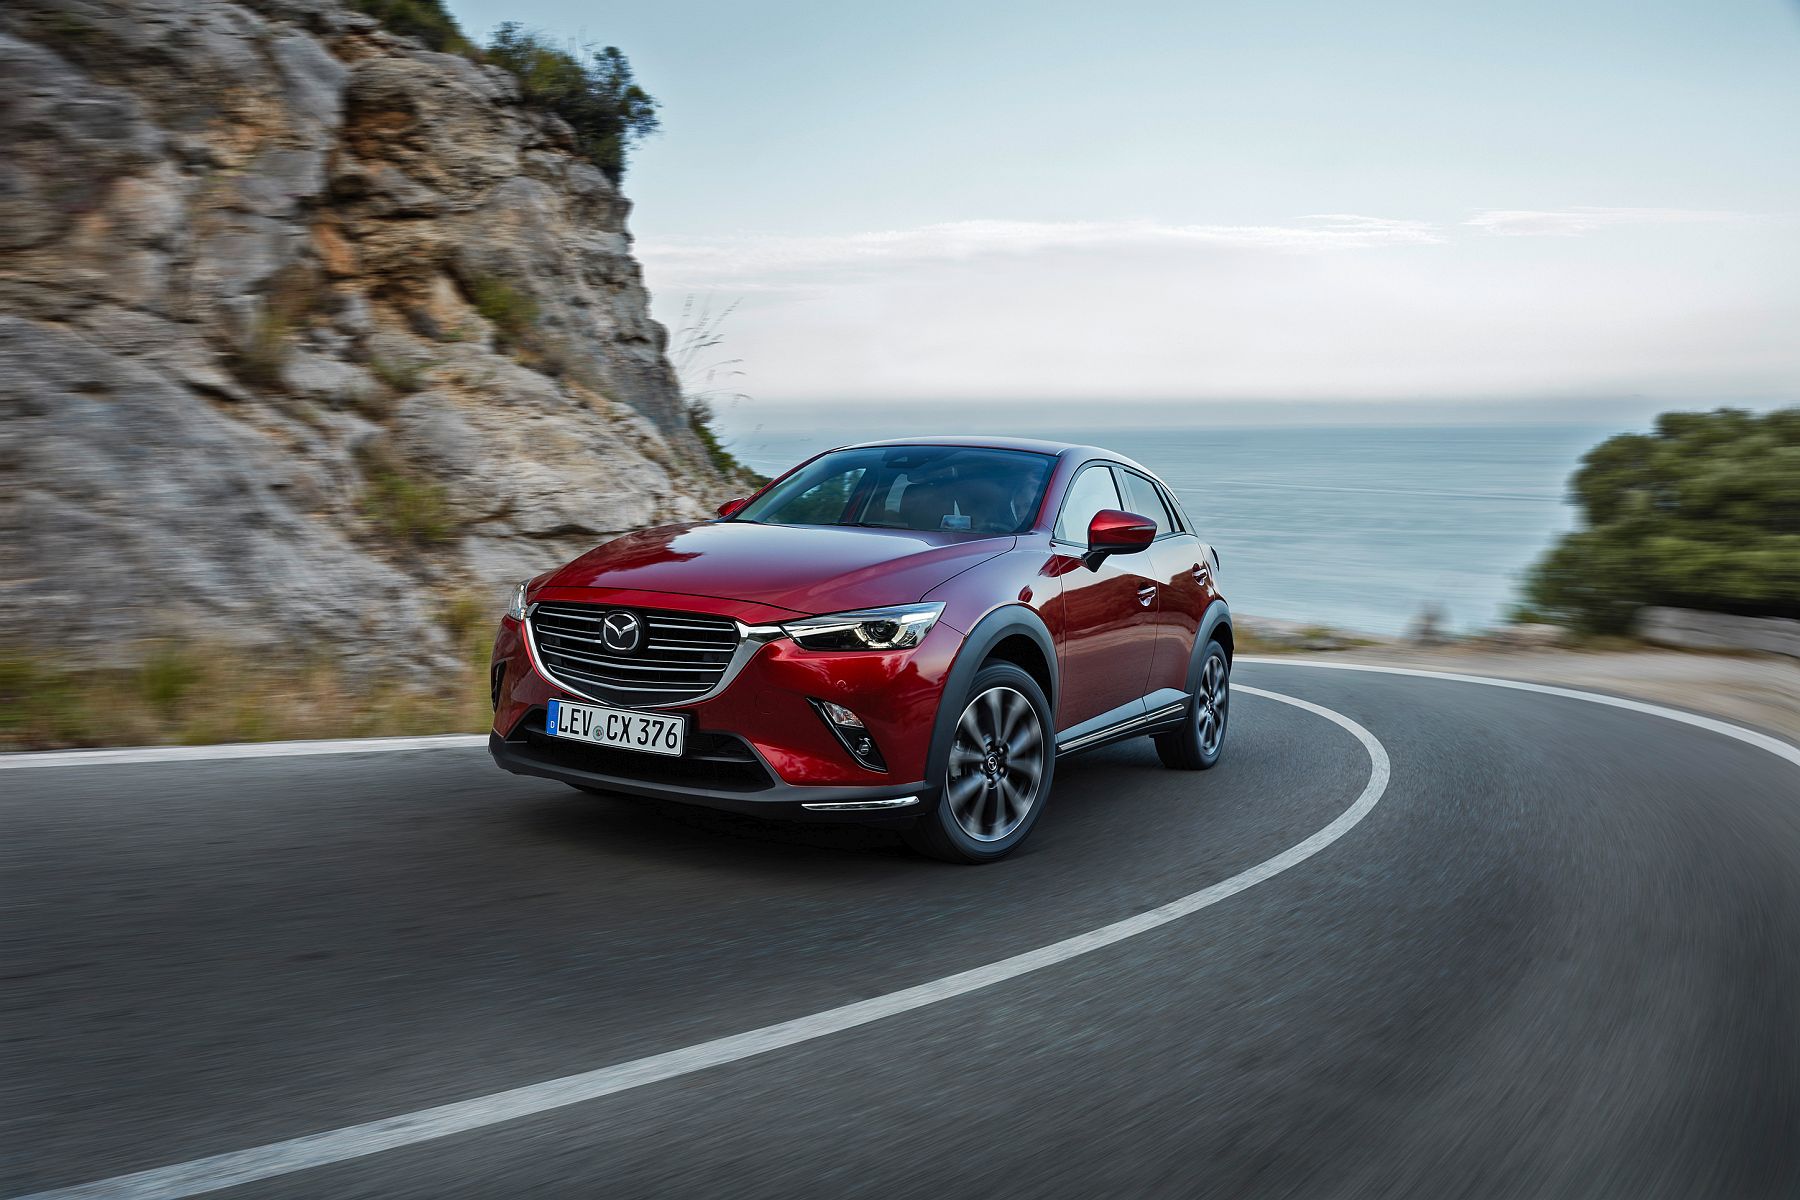 02_2018_MAZDA_CX-3_ACTION_FRONT